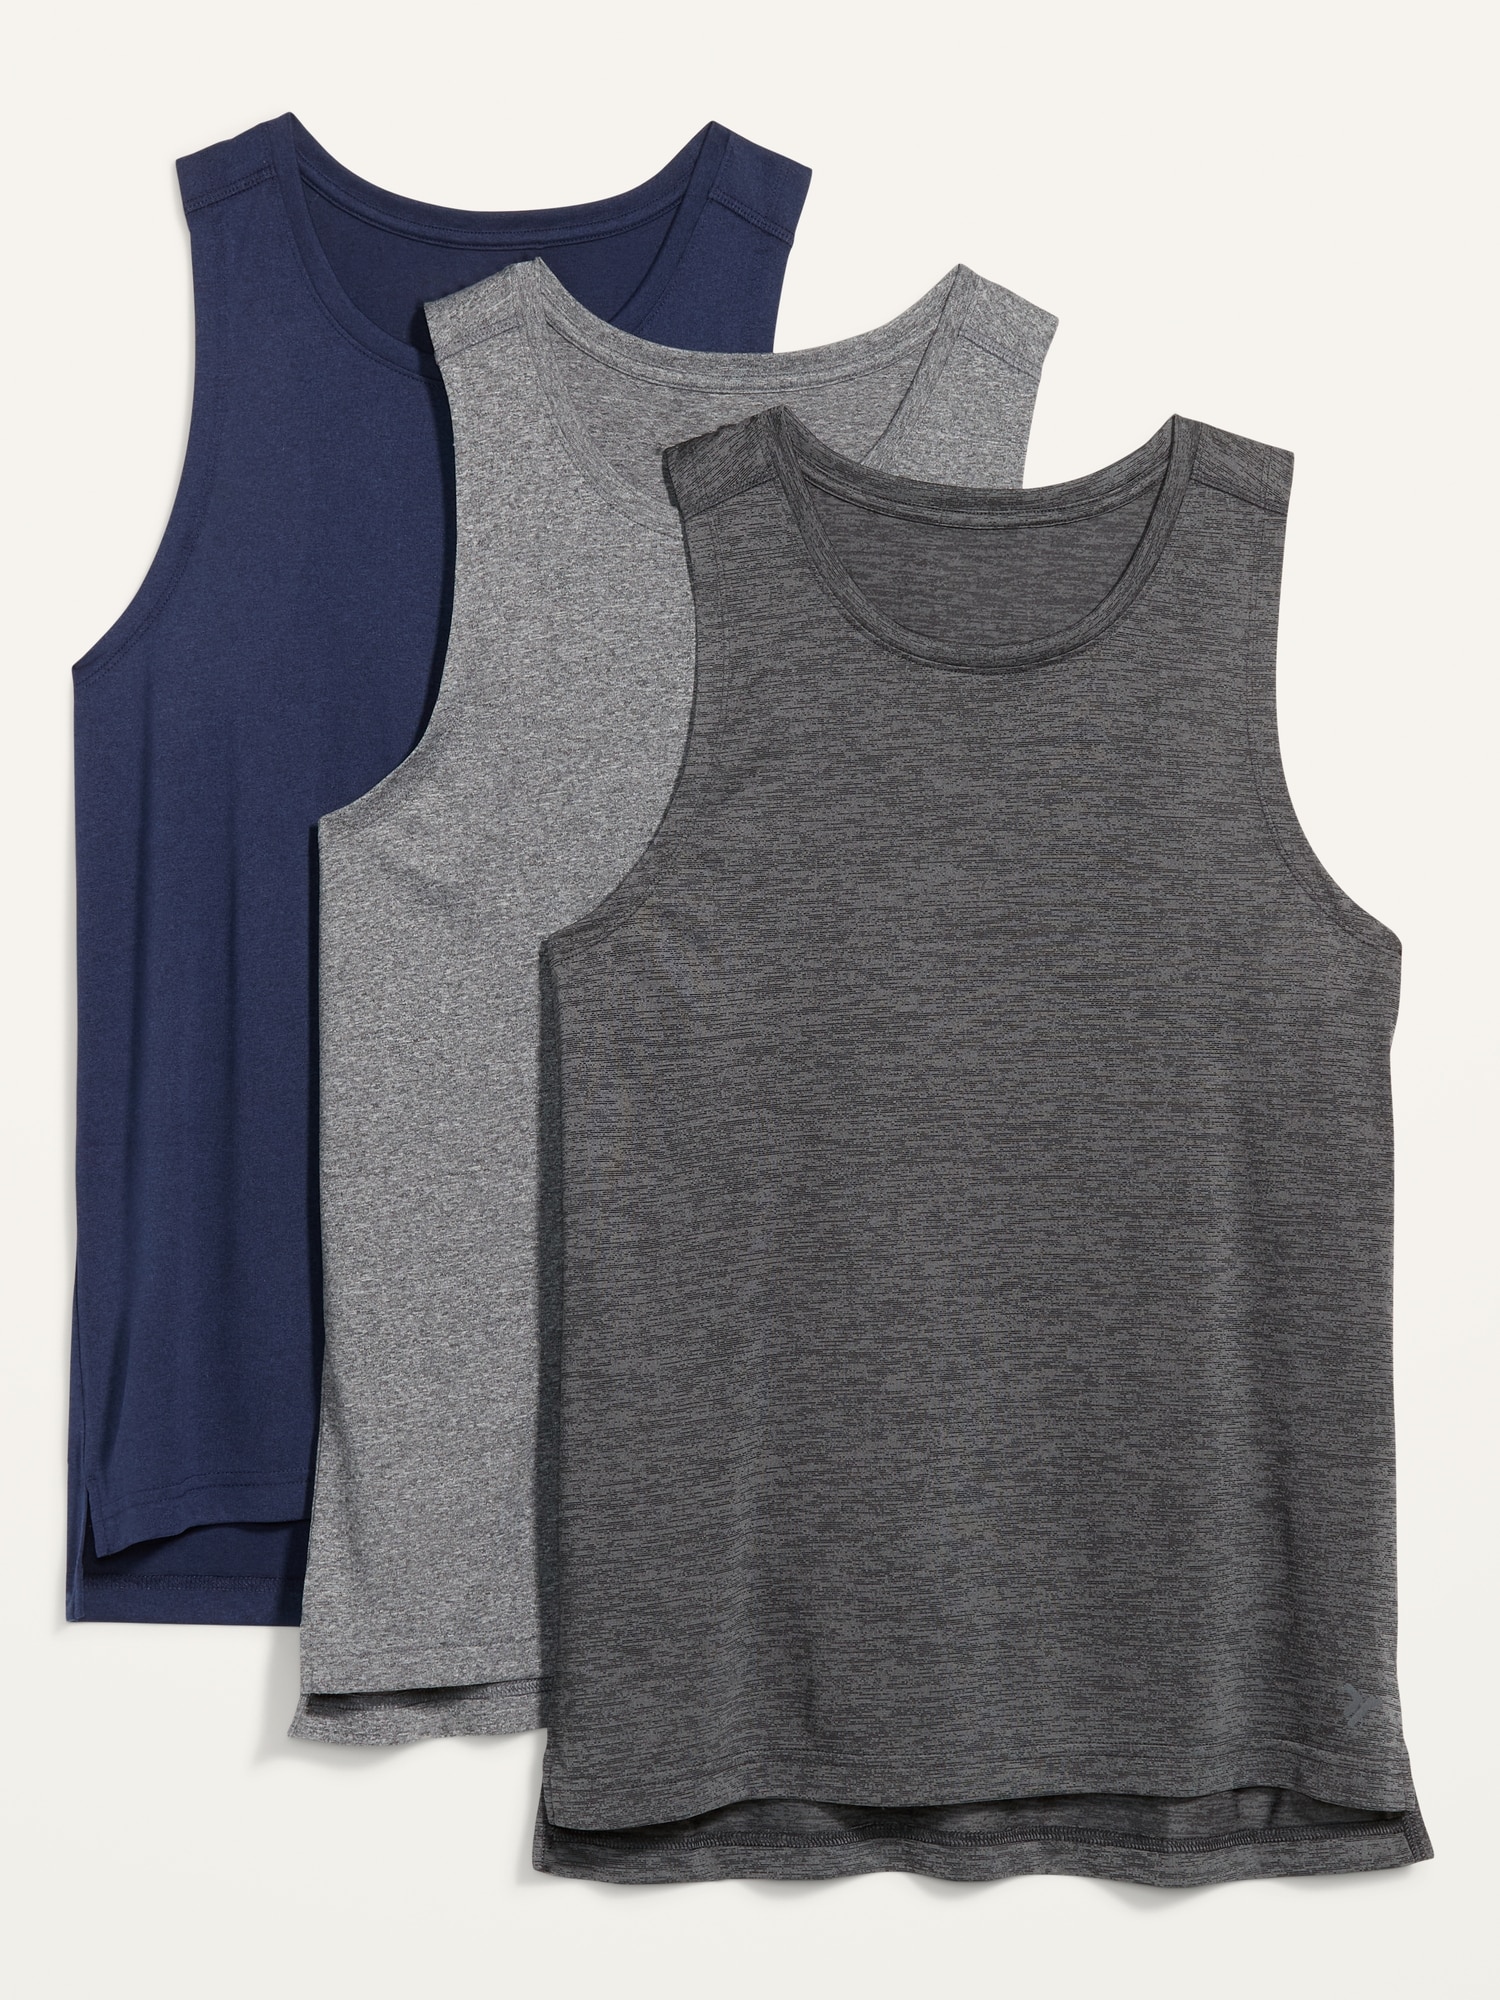 Go-Dry Cool Odor-Control Core Tank Top 3-Pack for Men | Old Navy